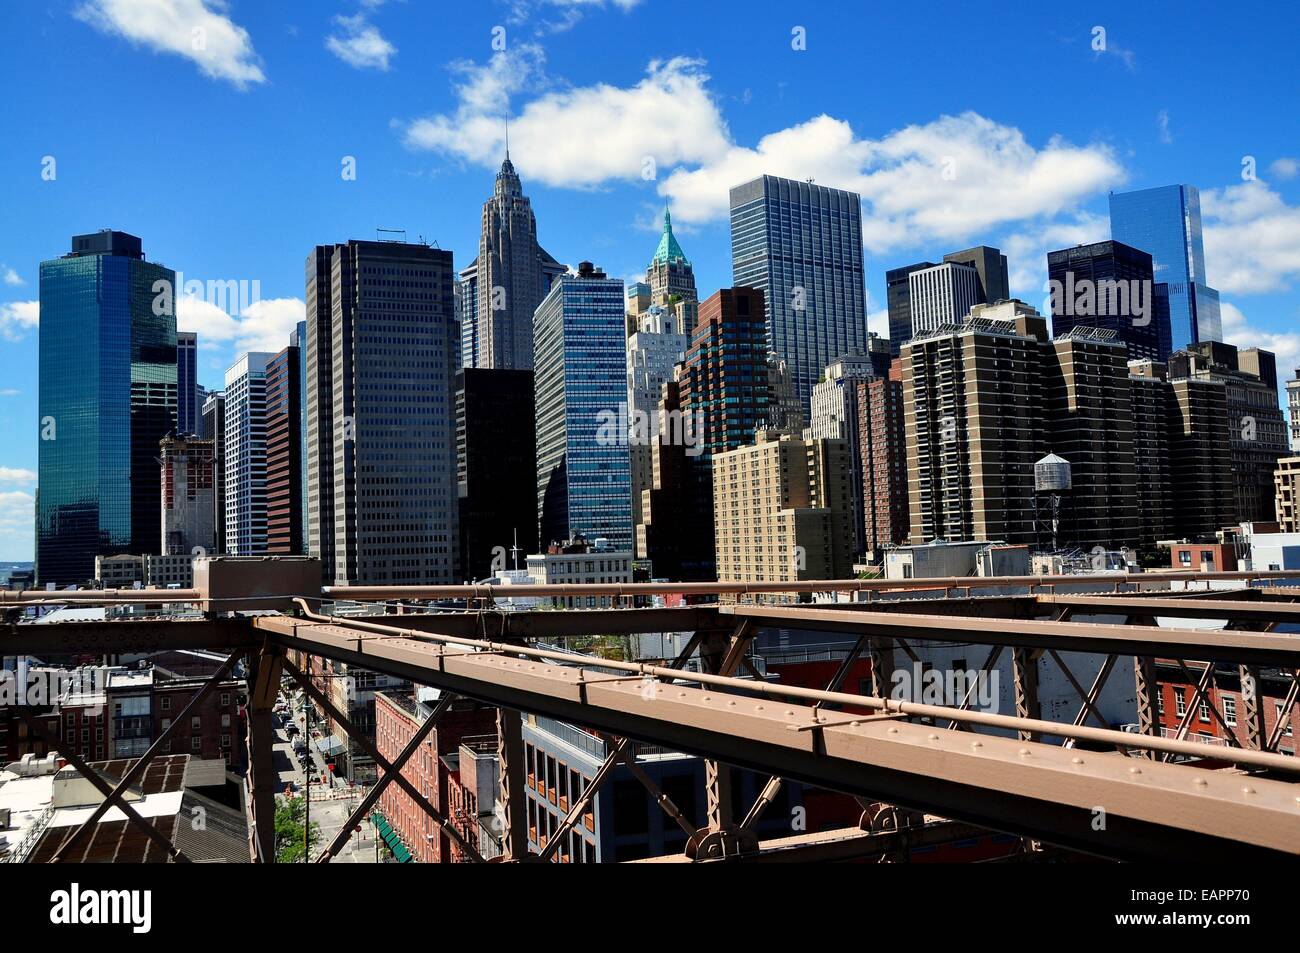 NYC:  Skyline of the Financial District centered around Wall Street in lower Manhattan seen from the Brooklyn Bridge Stock Photo